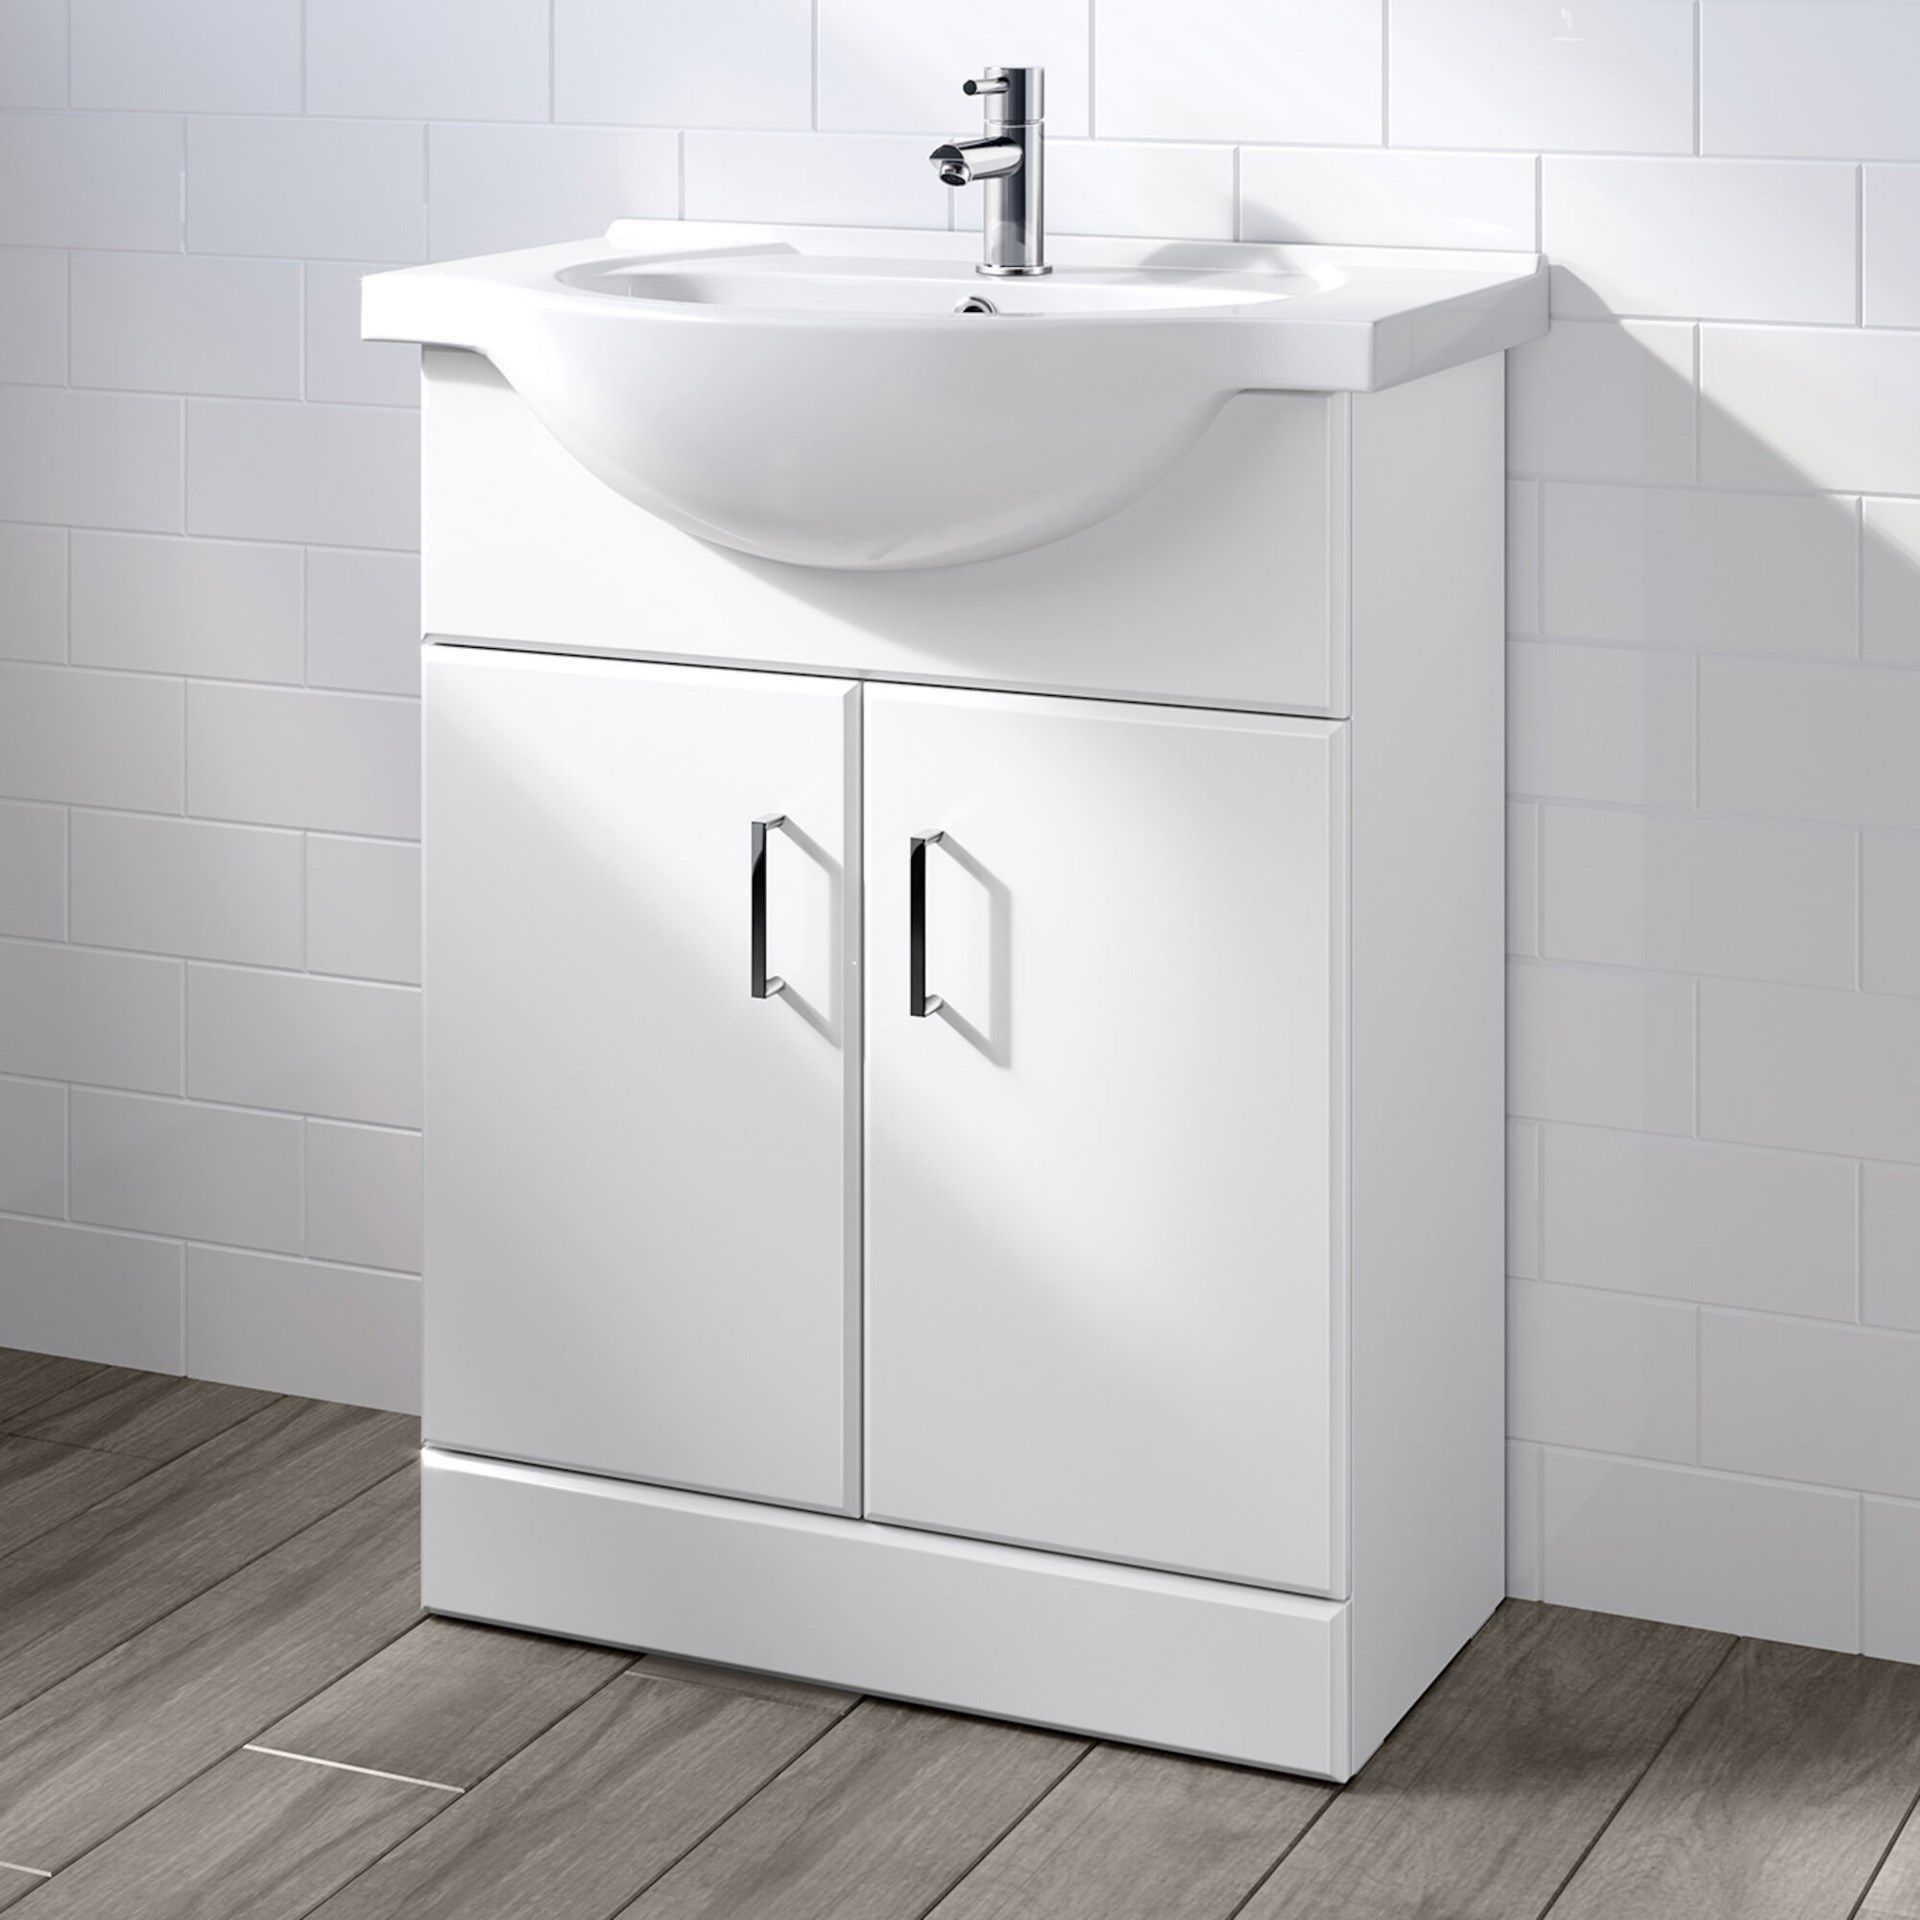 Brand New (CE128) 550mm Quartz Gloss White Built In Basin Cabinet. RRP £349.99. Comes complete with